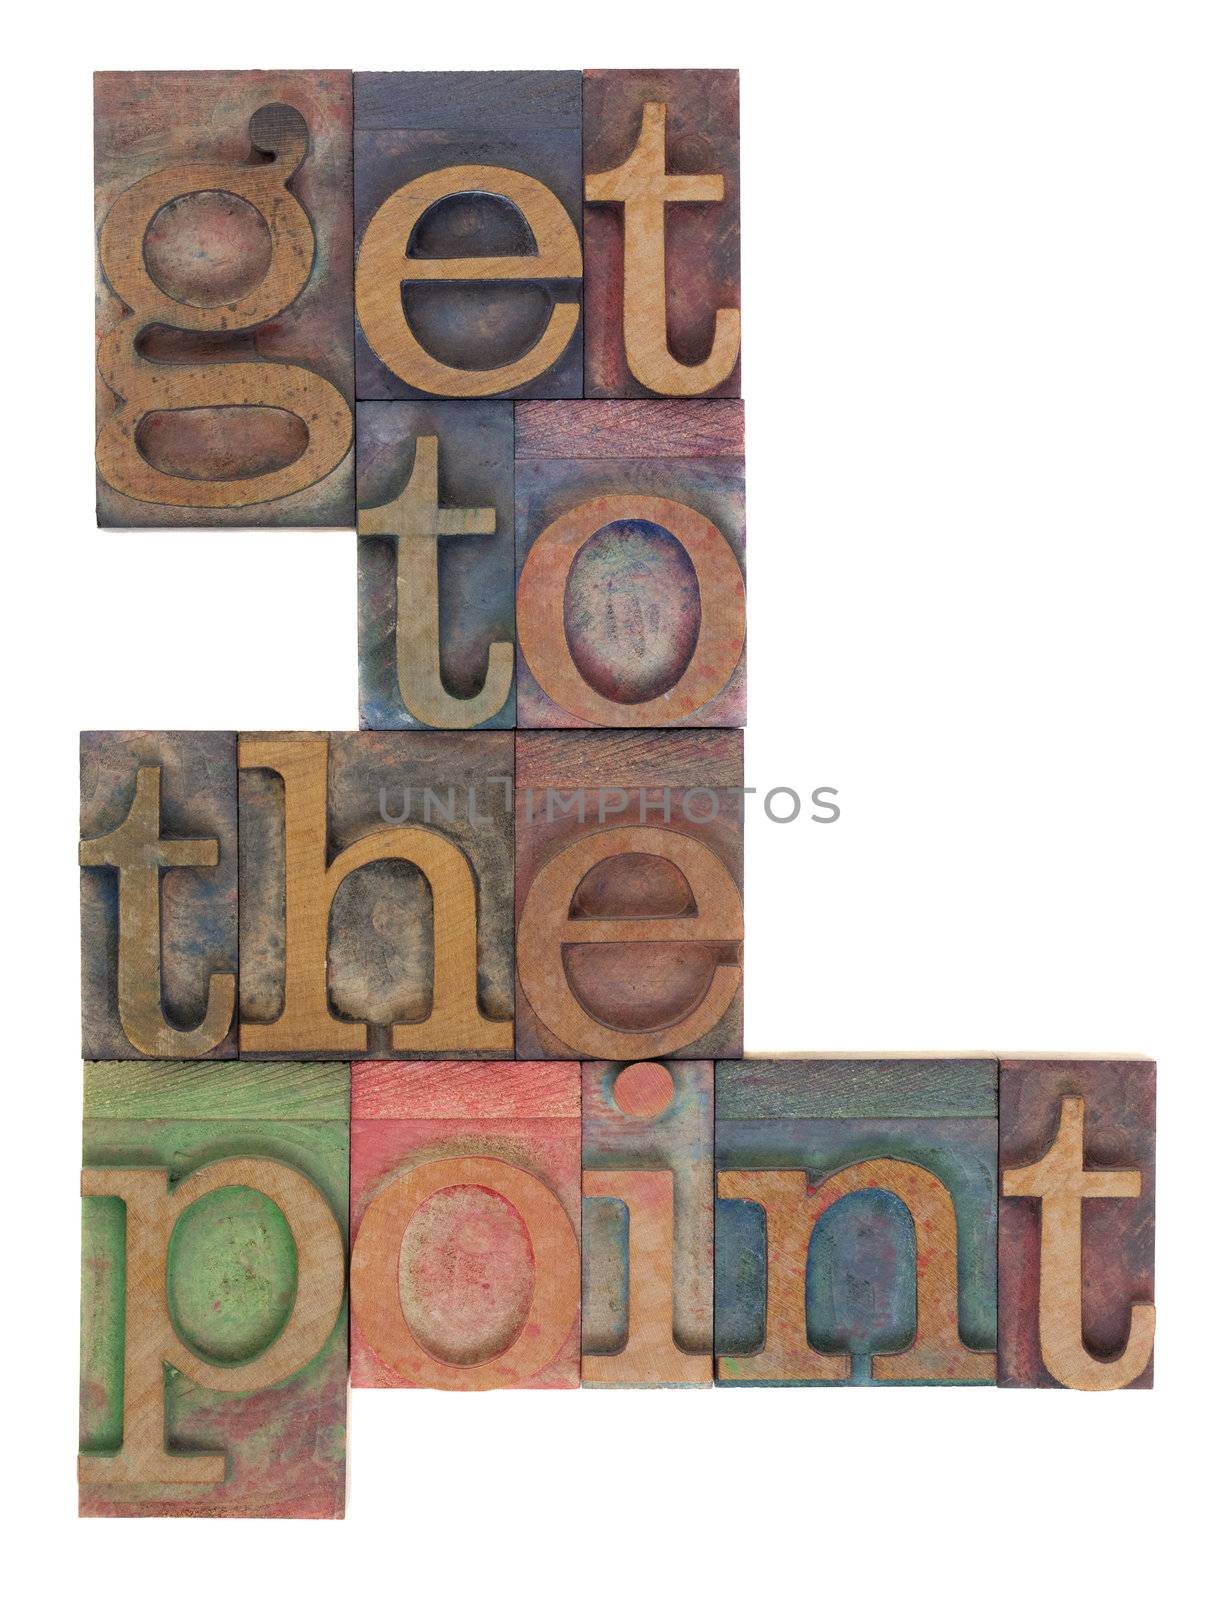 get to the point by PixelsAway